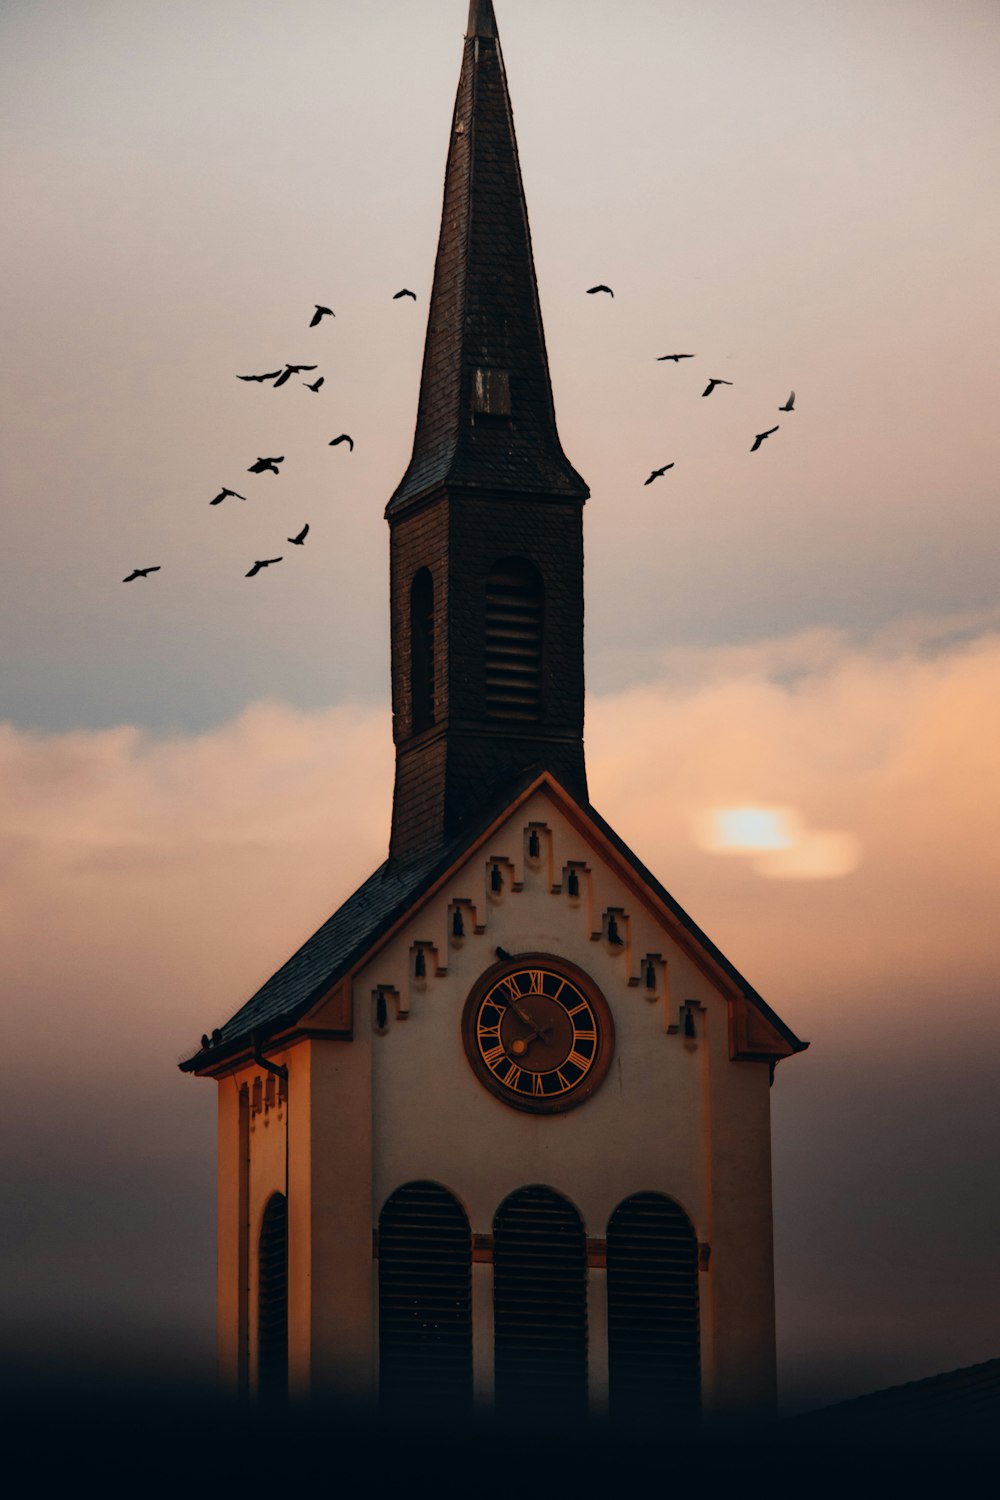 a church steeple with a clock and a flock of birds flying in the sky